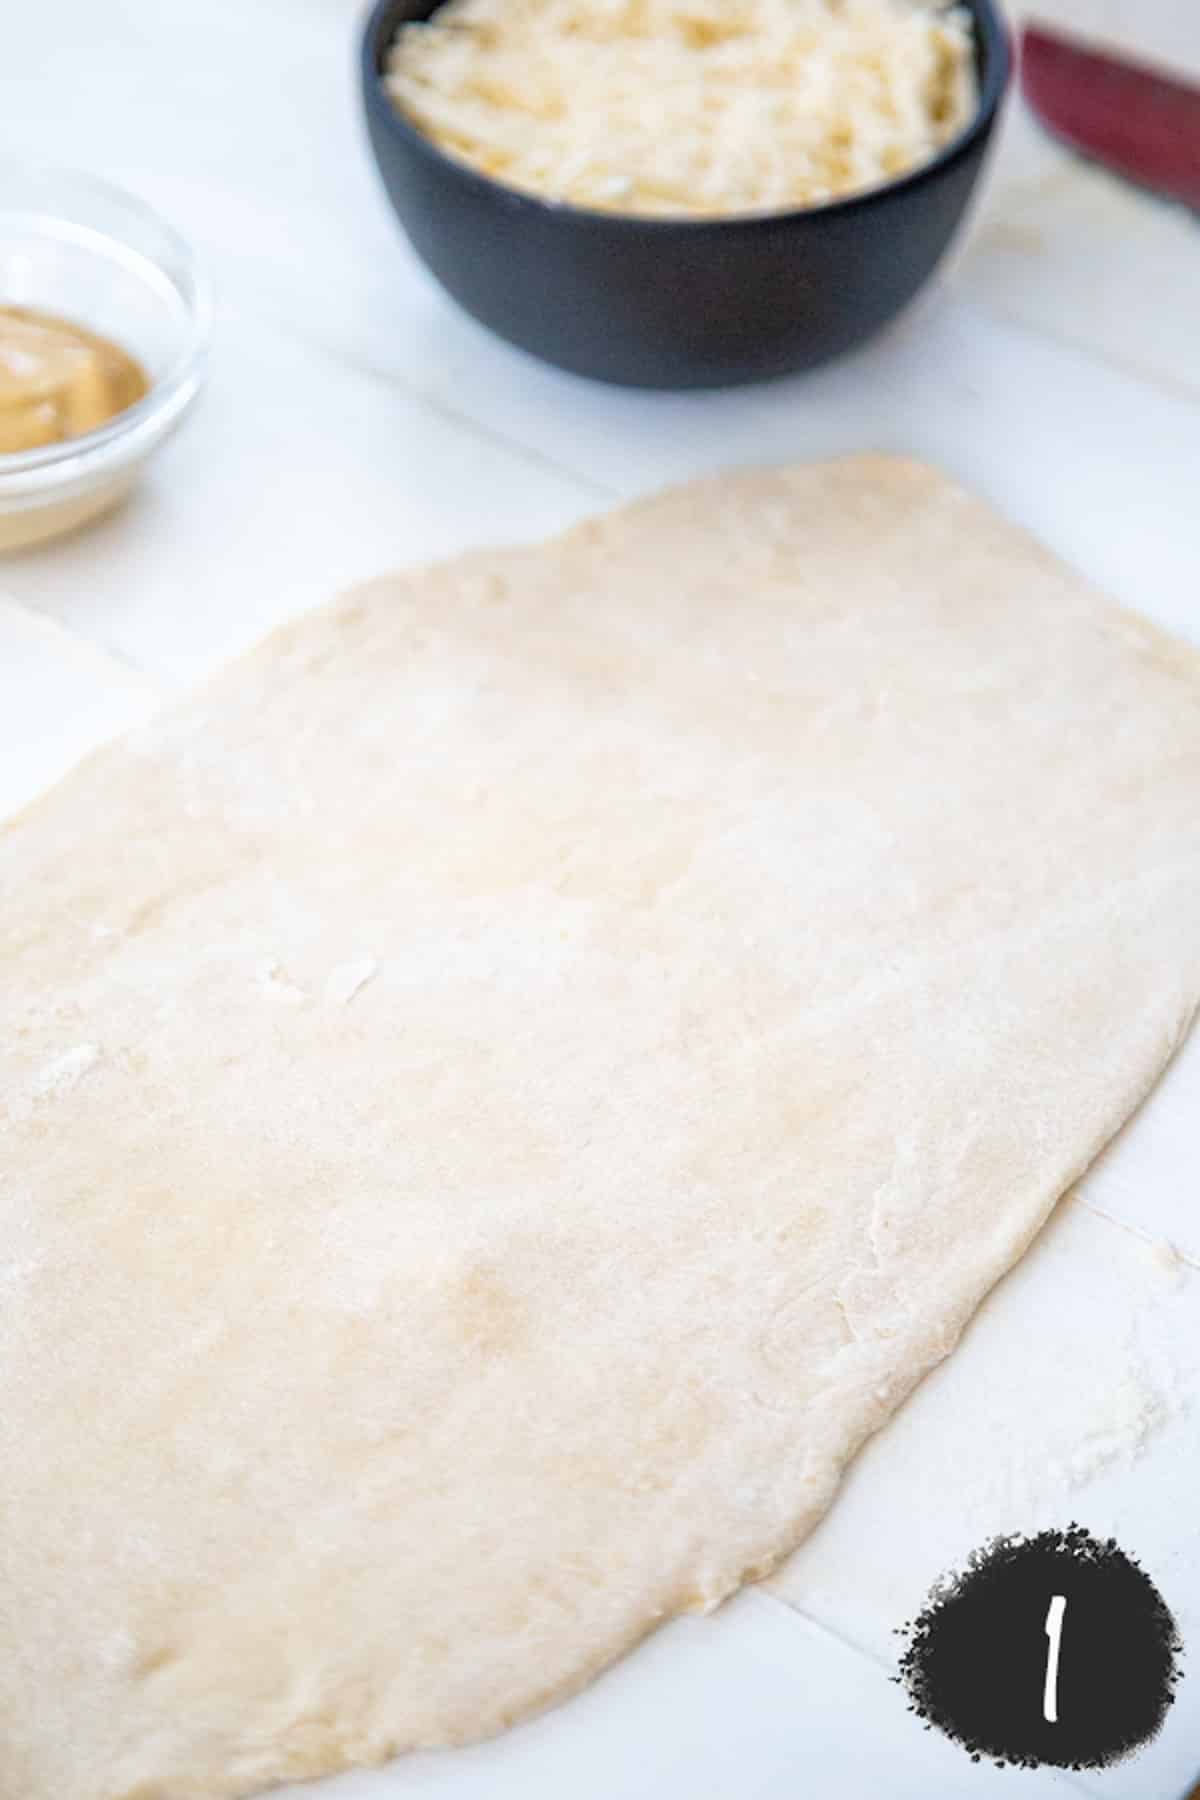 Pizza dough rolled out on a marble board with a black bowl of shredded white cheese and a rolling pin next to the dough.